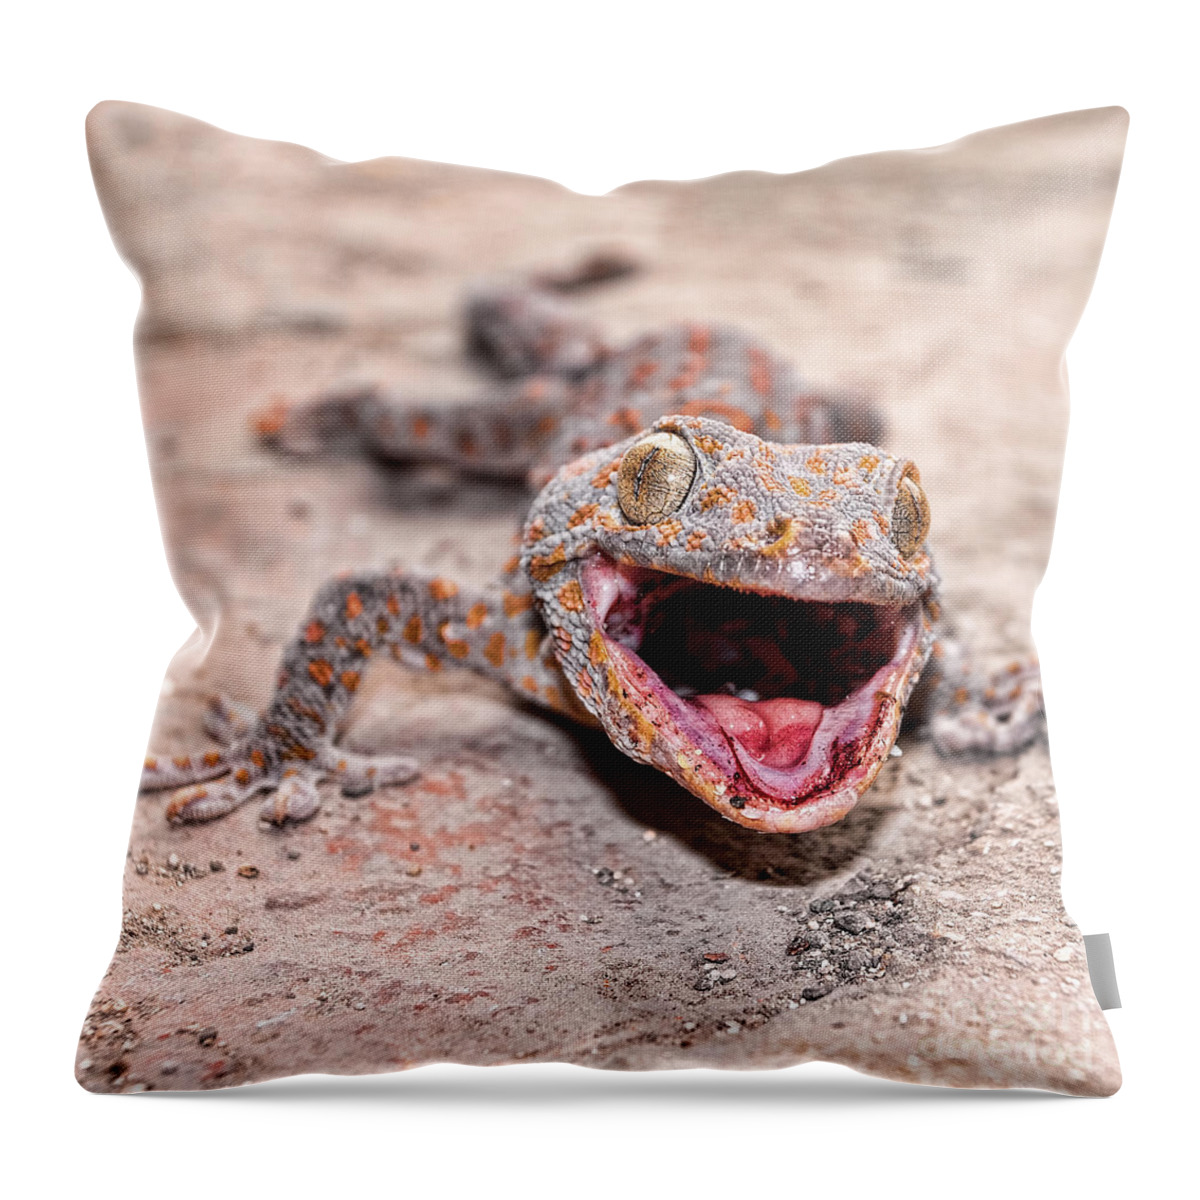 Animals Throw Pillow featuring the photograph Roar by Joerg Lingnau